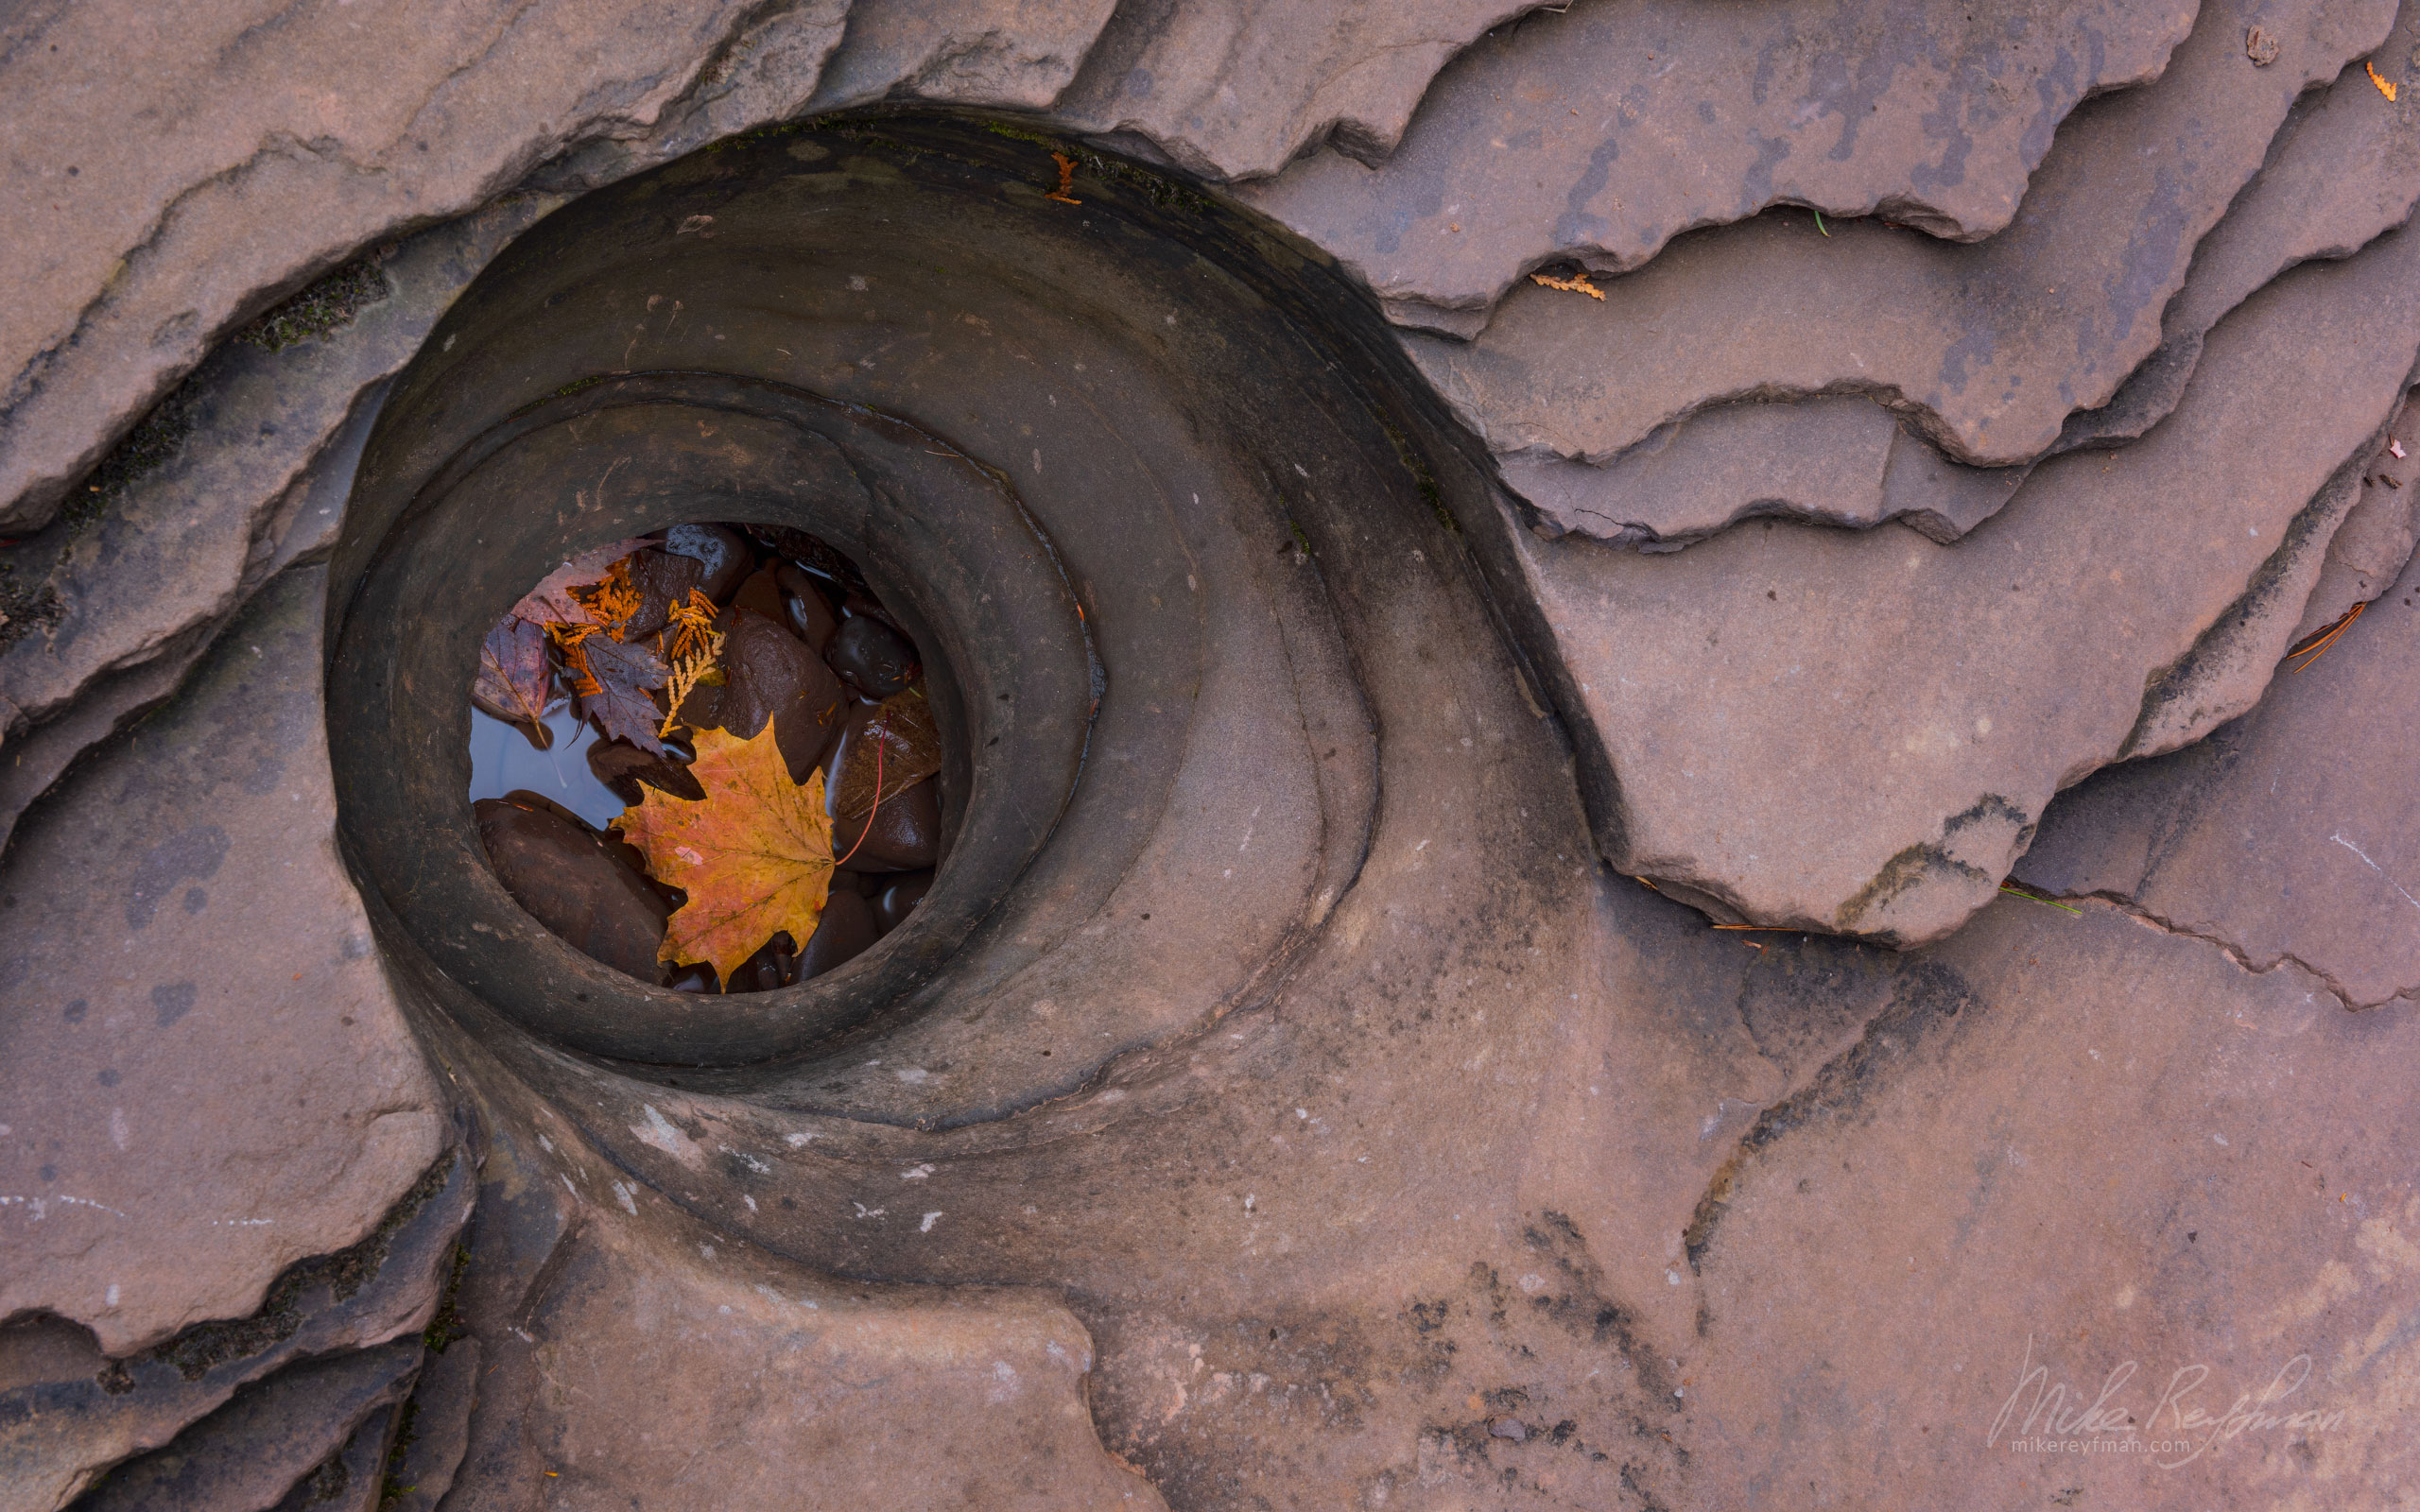 Pebbles and fall leaves in the bedrock pothole of Presque Isle River. Porcupine Mountains, Upper Peninsula, Michigan, USA. UP-MI_051_ZRA8009.jpg - Michigan's Upper Peninsula - the best destination in US for fall colors. - Mike Reyfman Photography